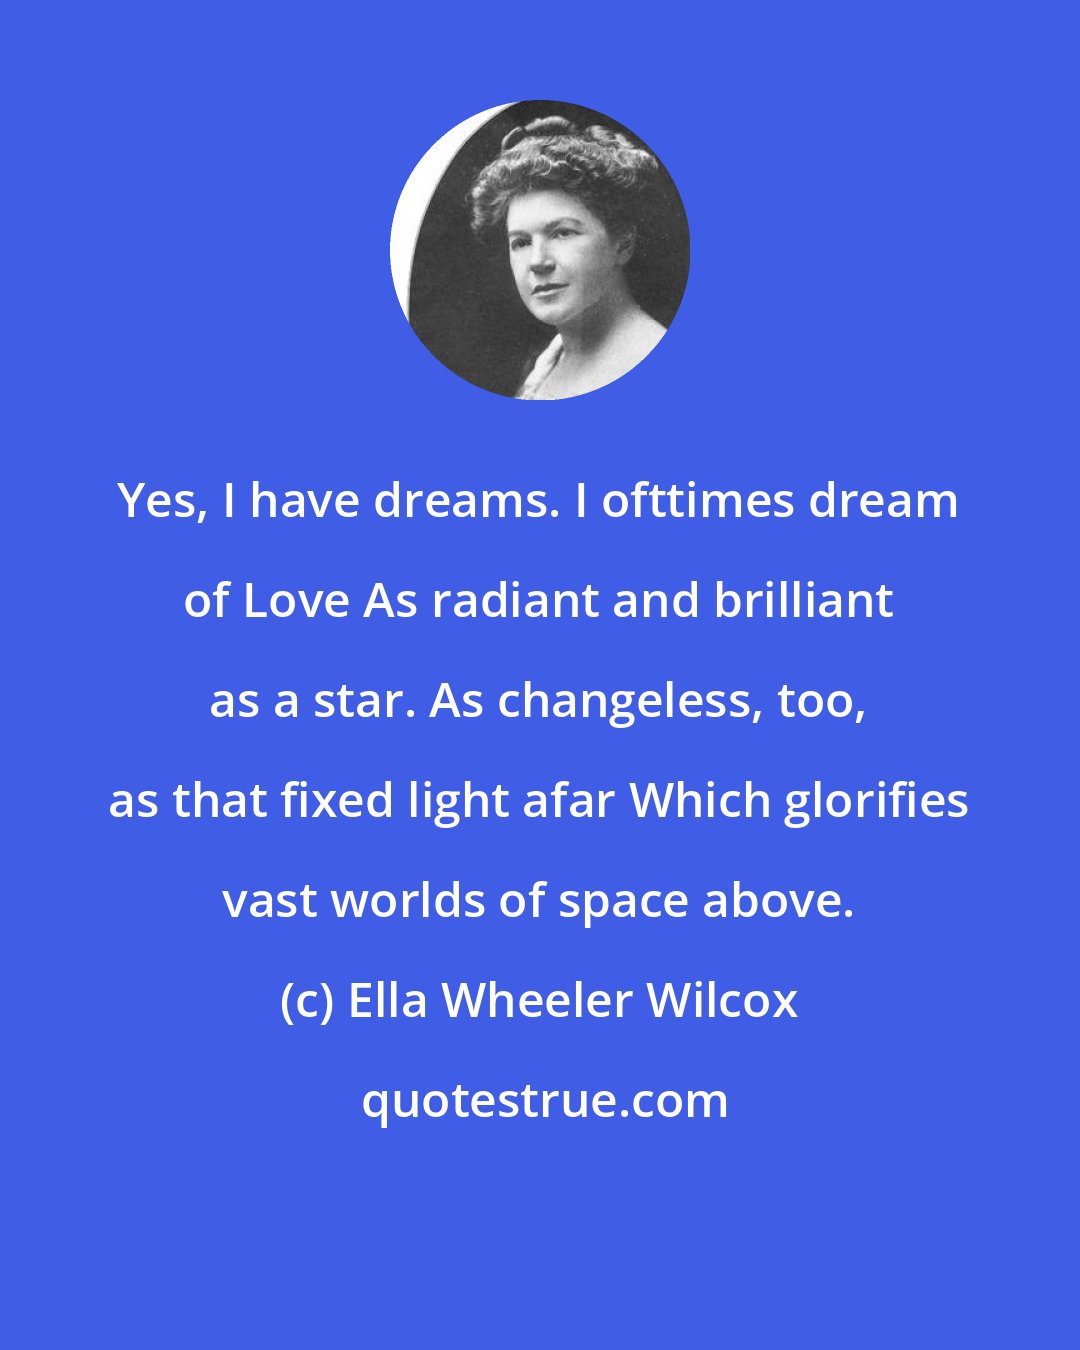 Ella Wheeler Wilcox: Yes, I have dreams. I ofttimes dream of Love As radiant and brilliant as a star. As changeless, too, as that fixed light afar Which glorifies vast worlds of space above.